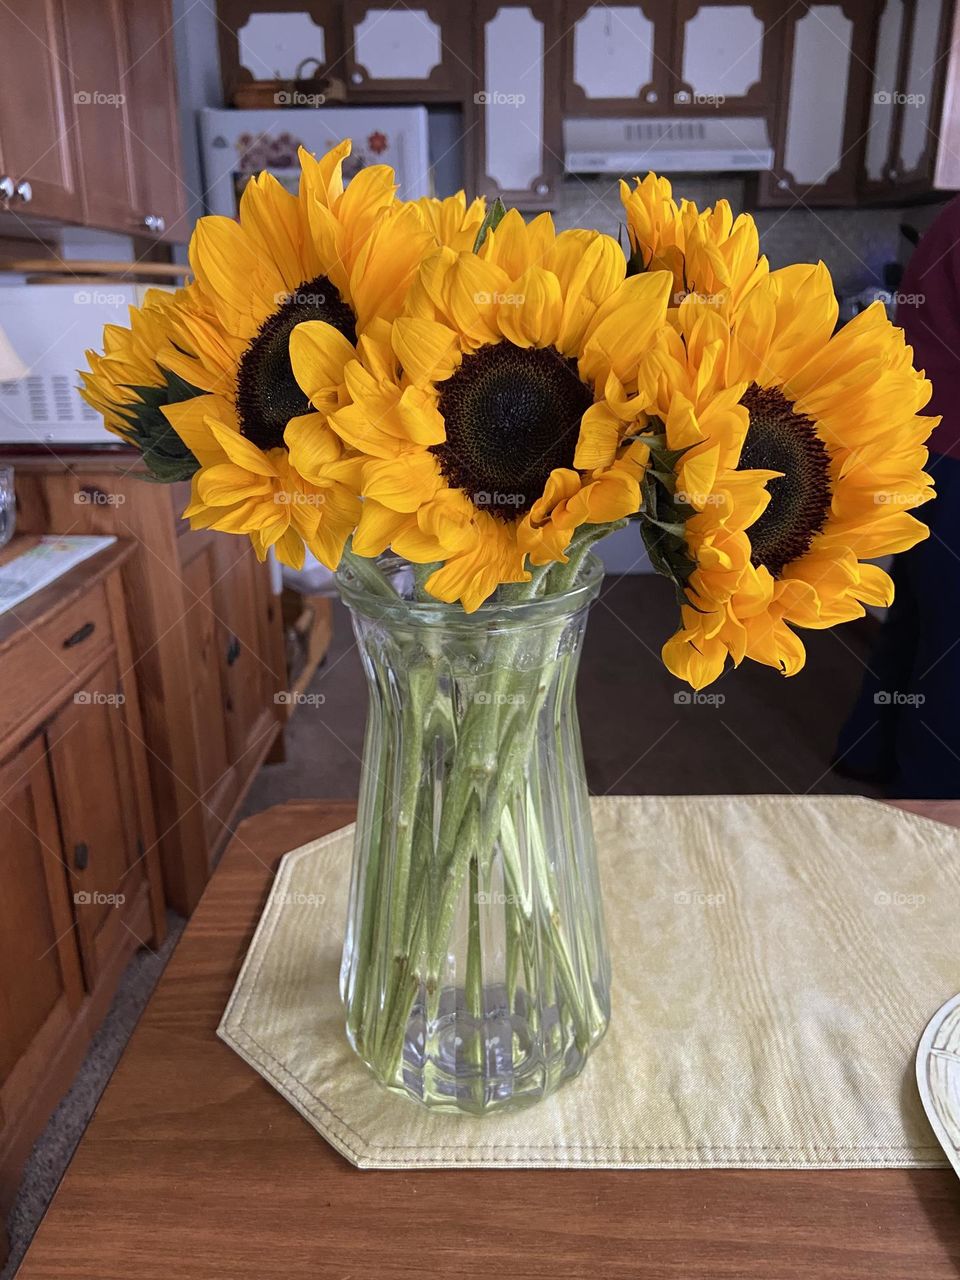 This beautiful bouquet of sunflowers was sent to me by a friend last year when my father passed away. She calls me “Sunshine” which is why she chose them. They reminded me that there is brightness even in times of sorrow. 